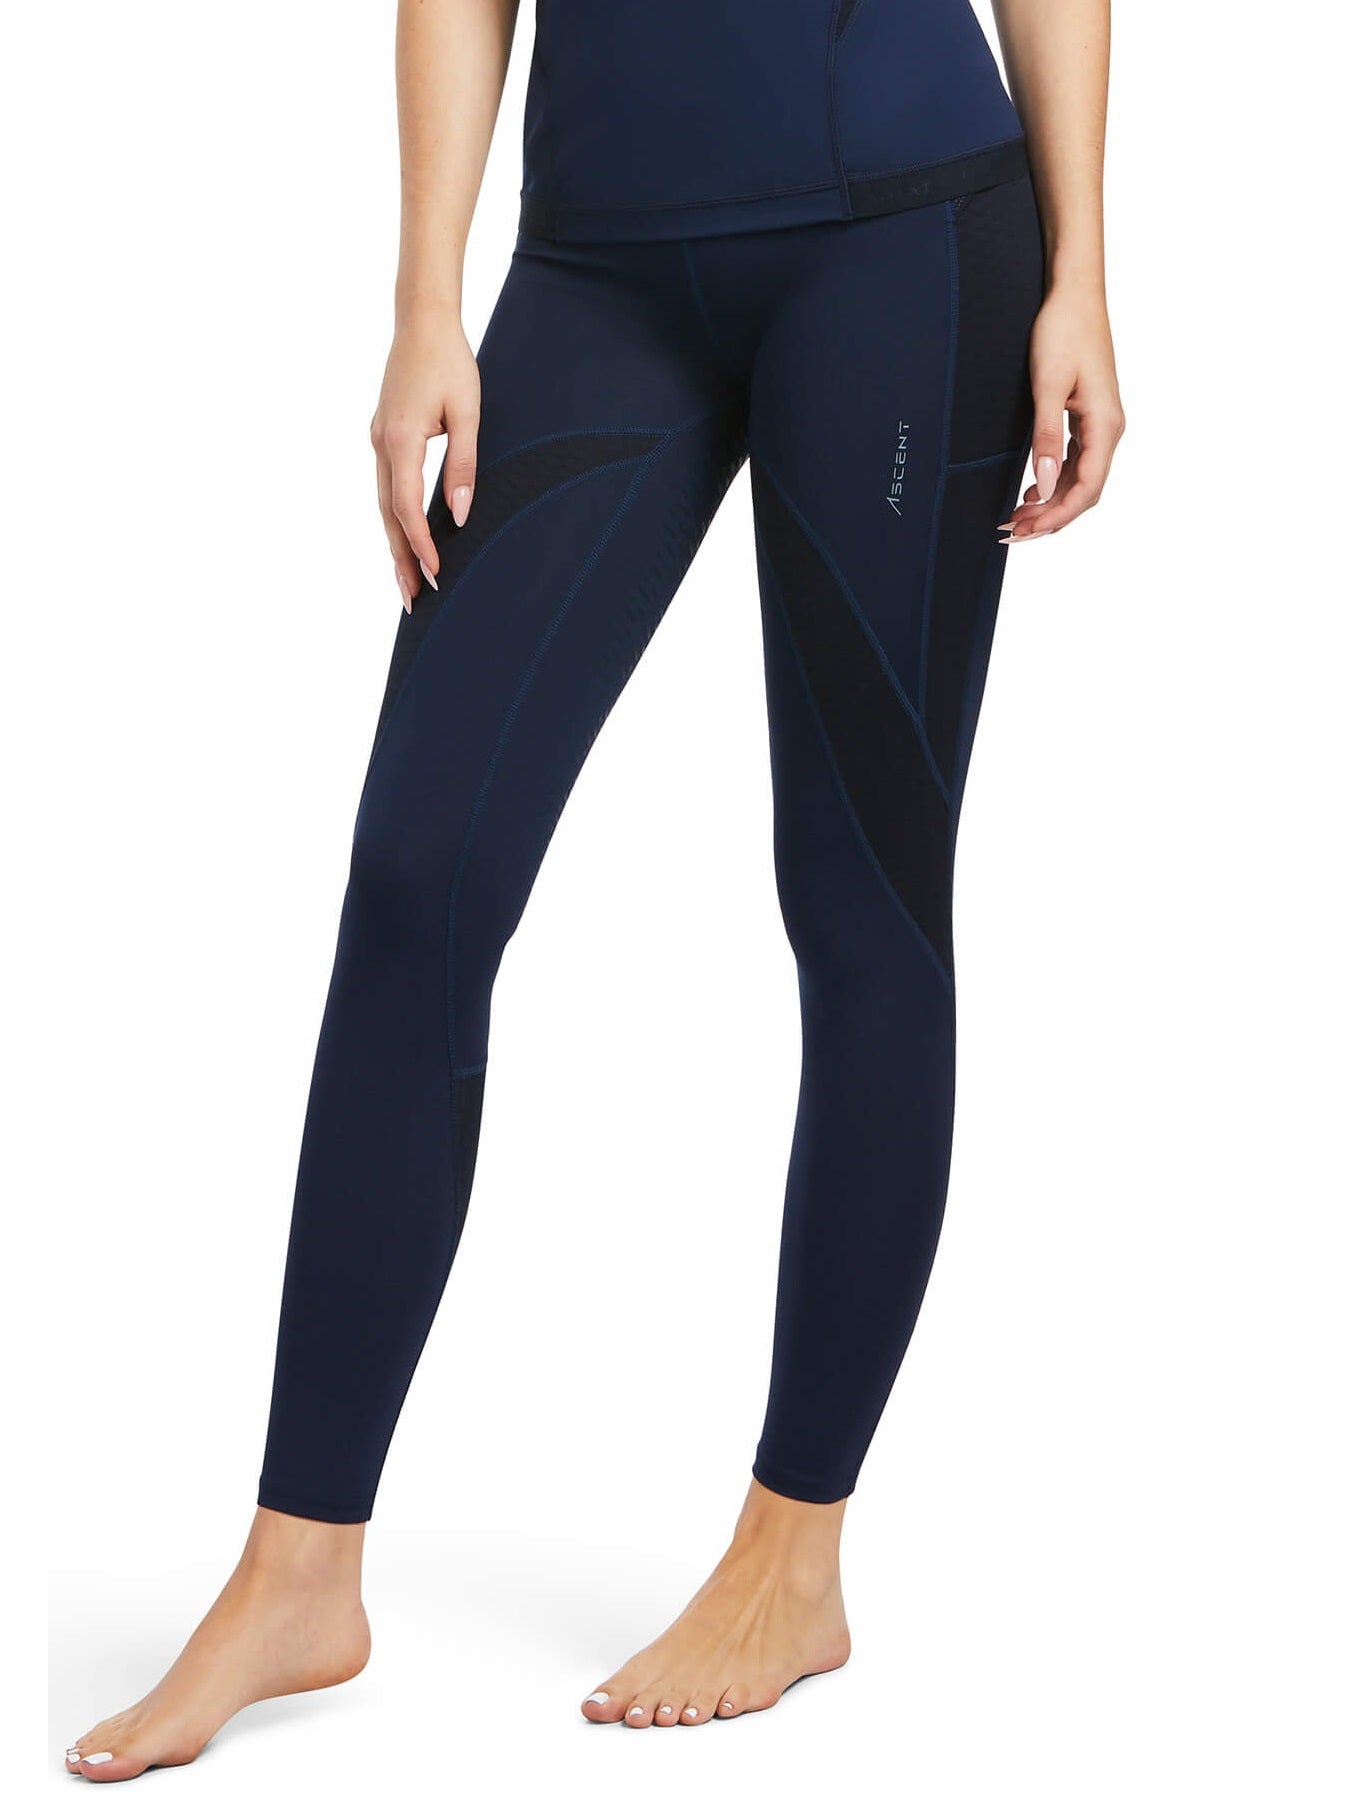 50% OFF - ARIAT Ascent Half Grip Riding Tights - Womens - Navy - Size: LARGE